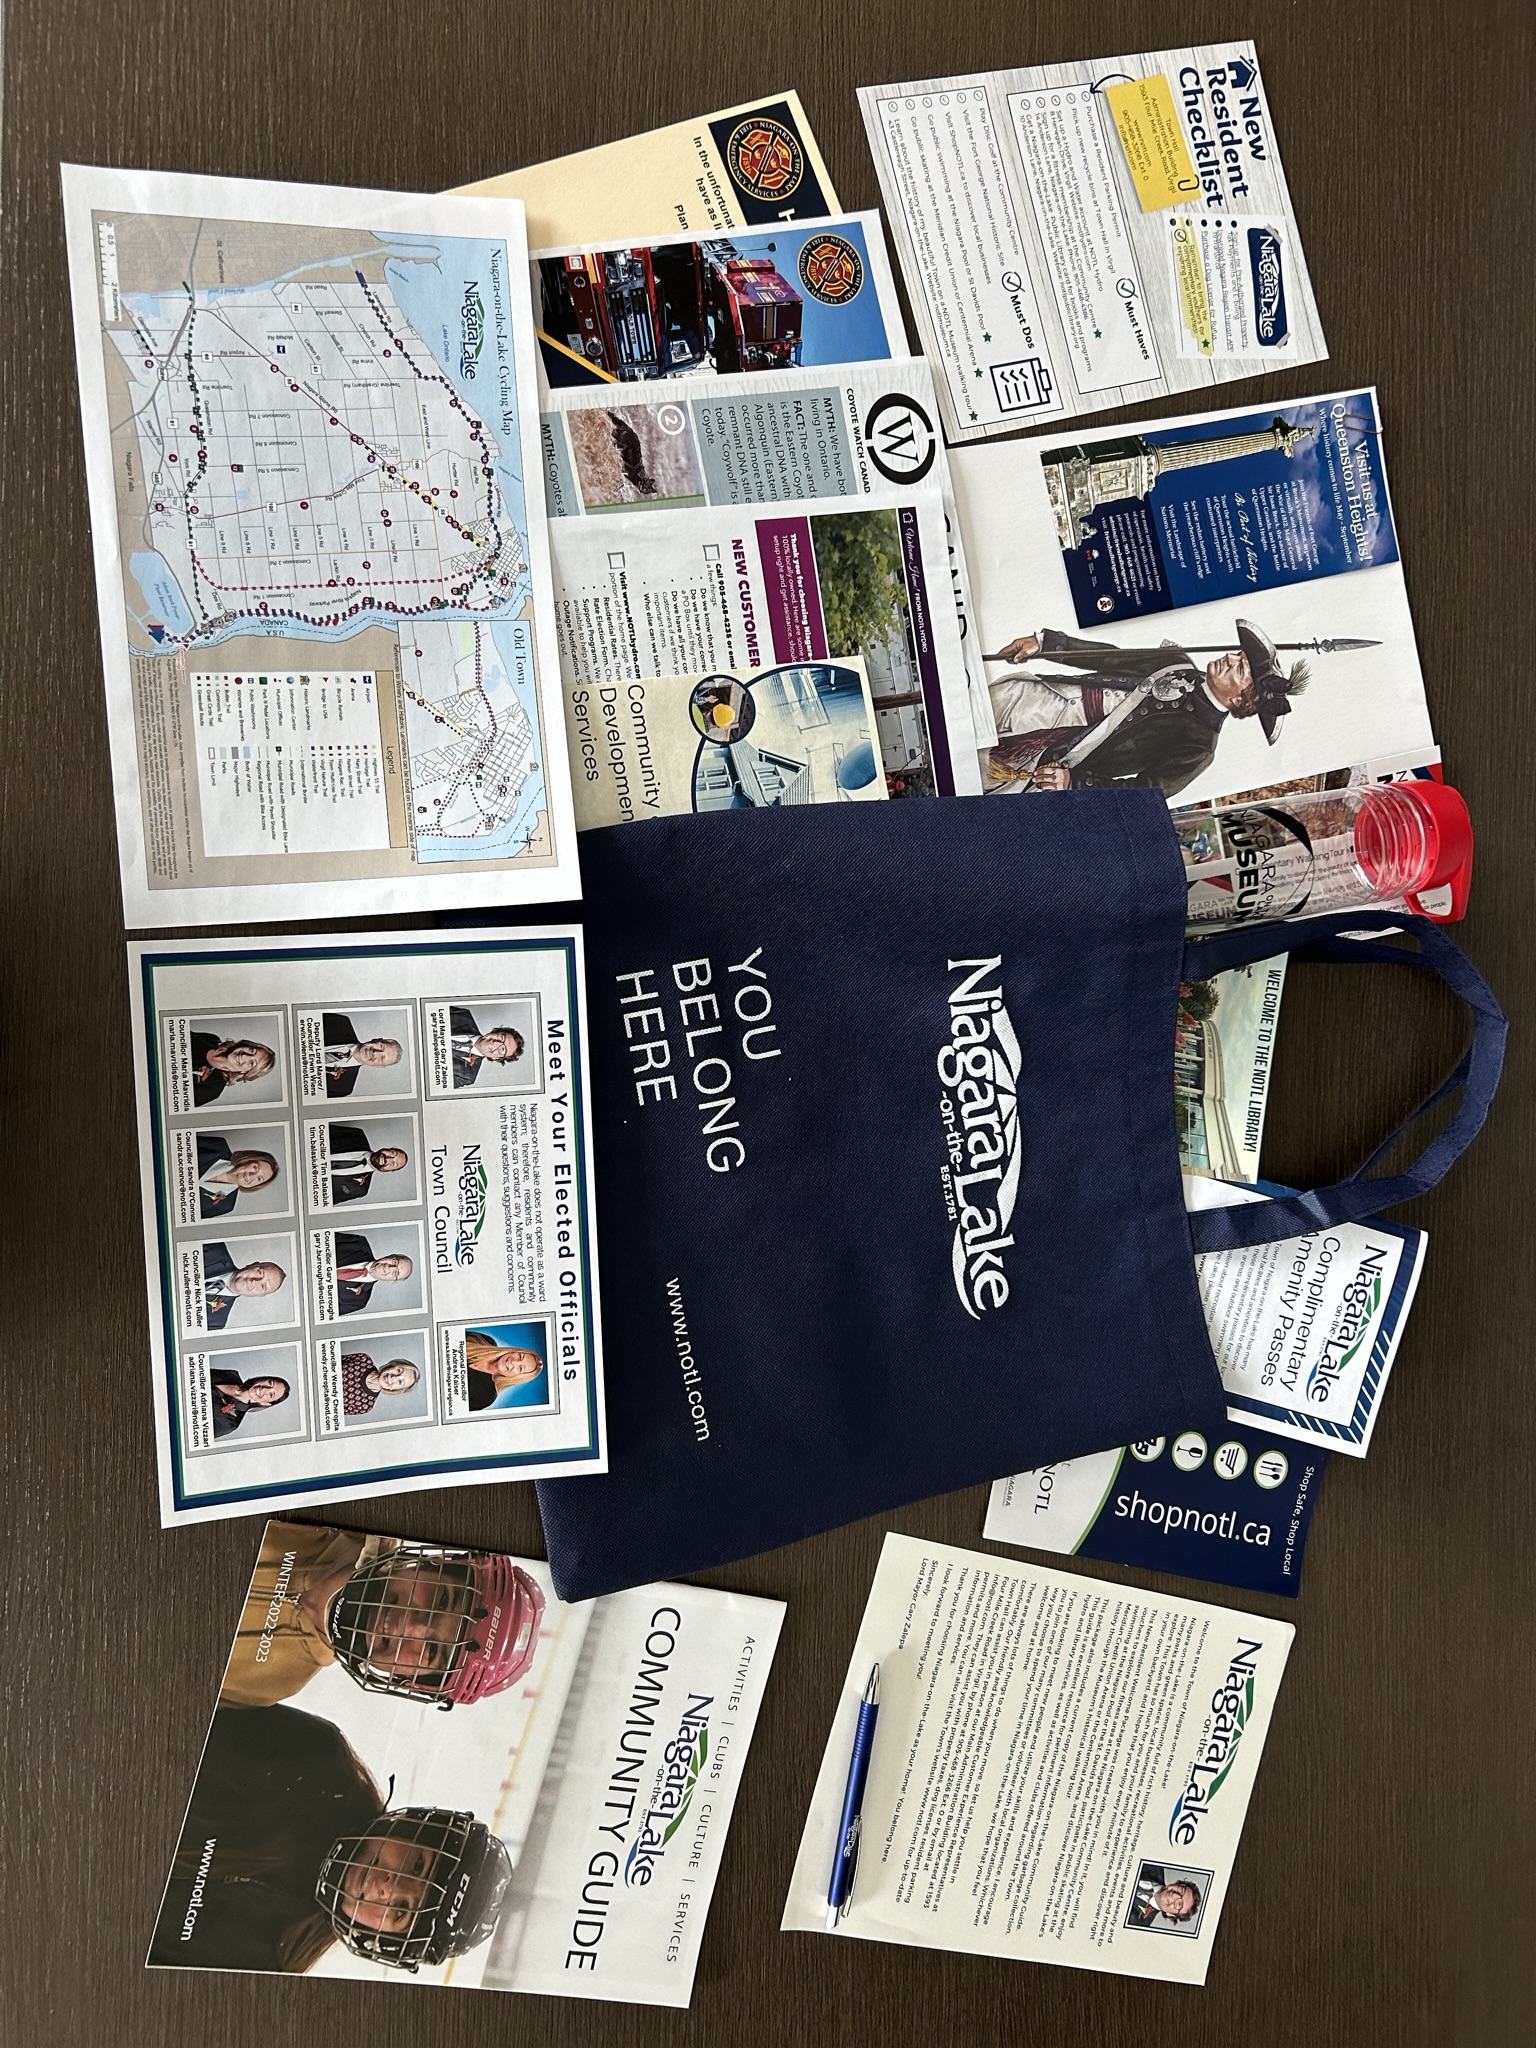 An example of the contents in the New Resident Welcome Packages